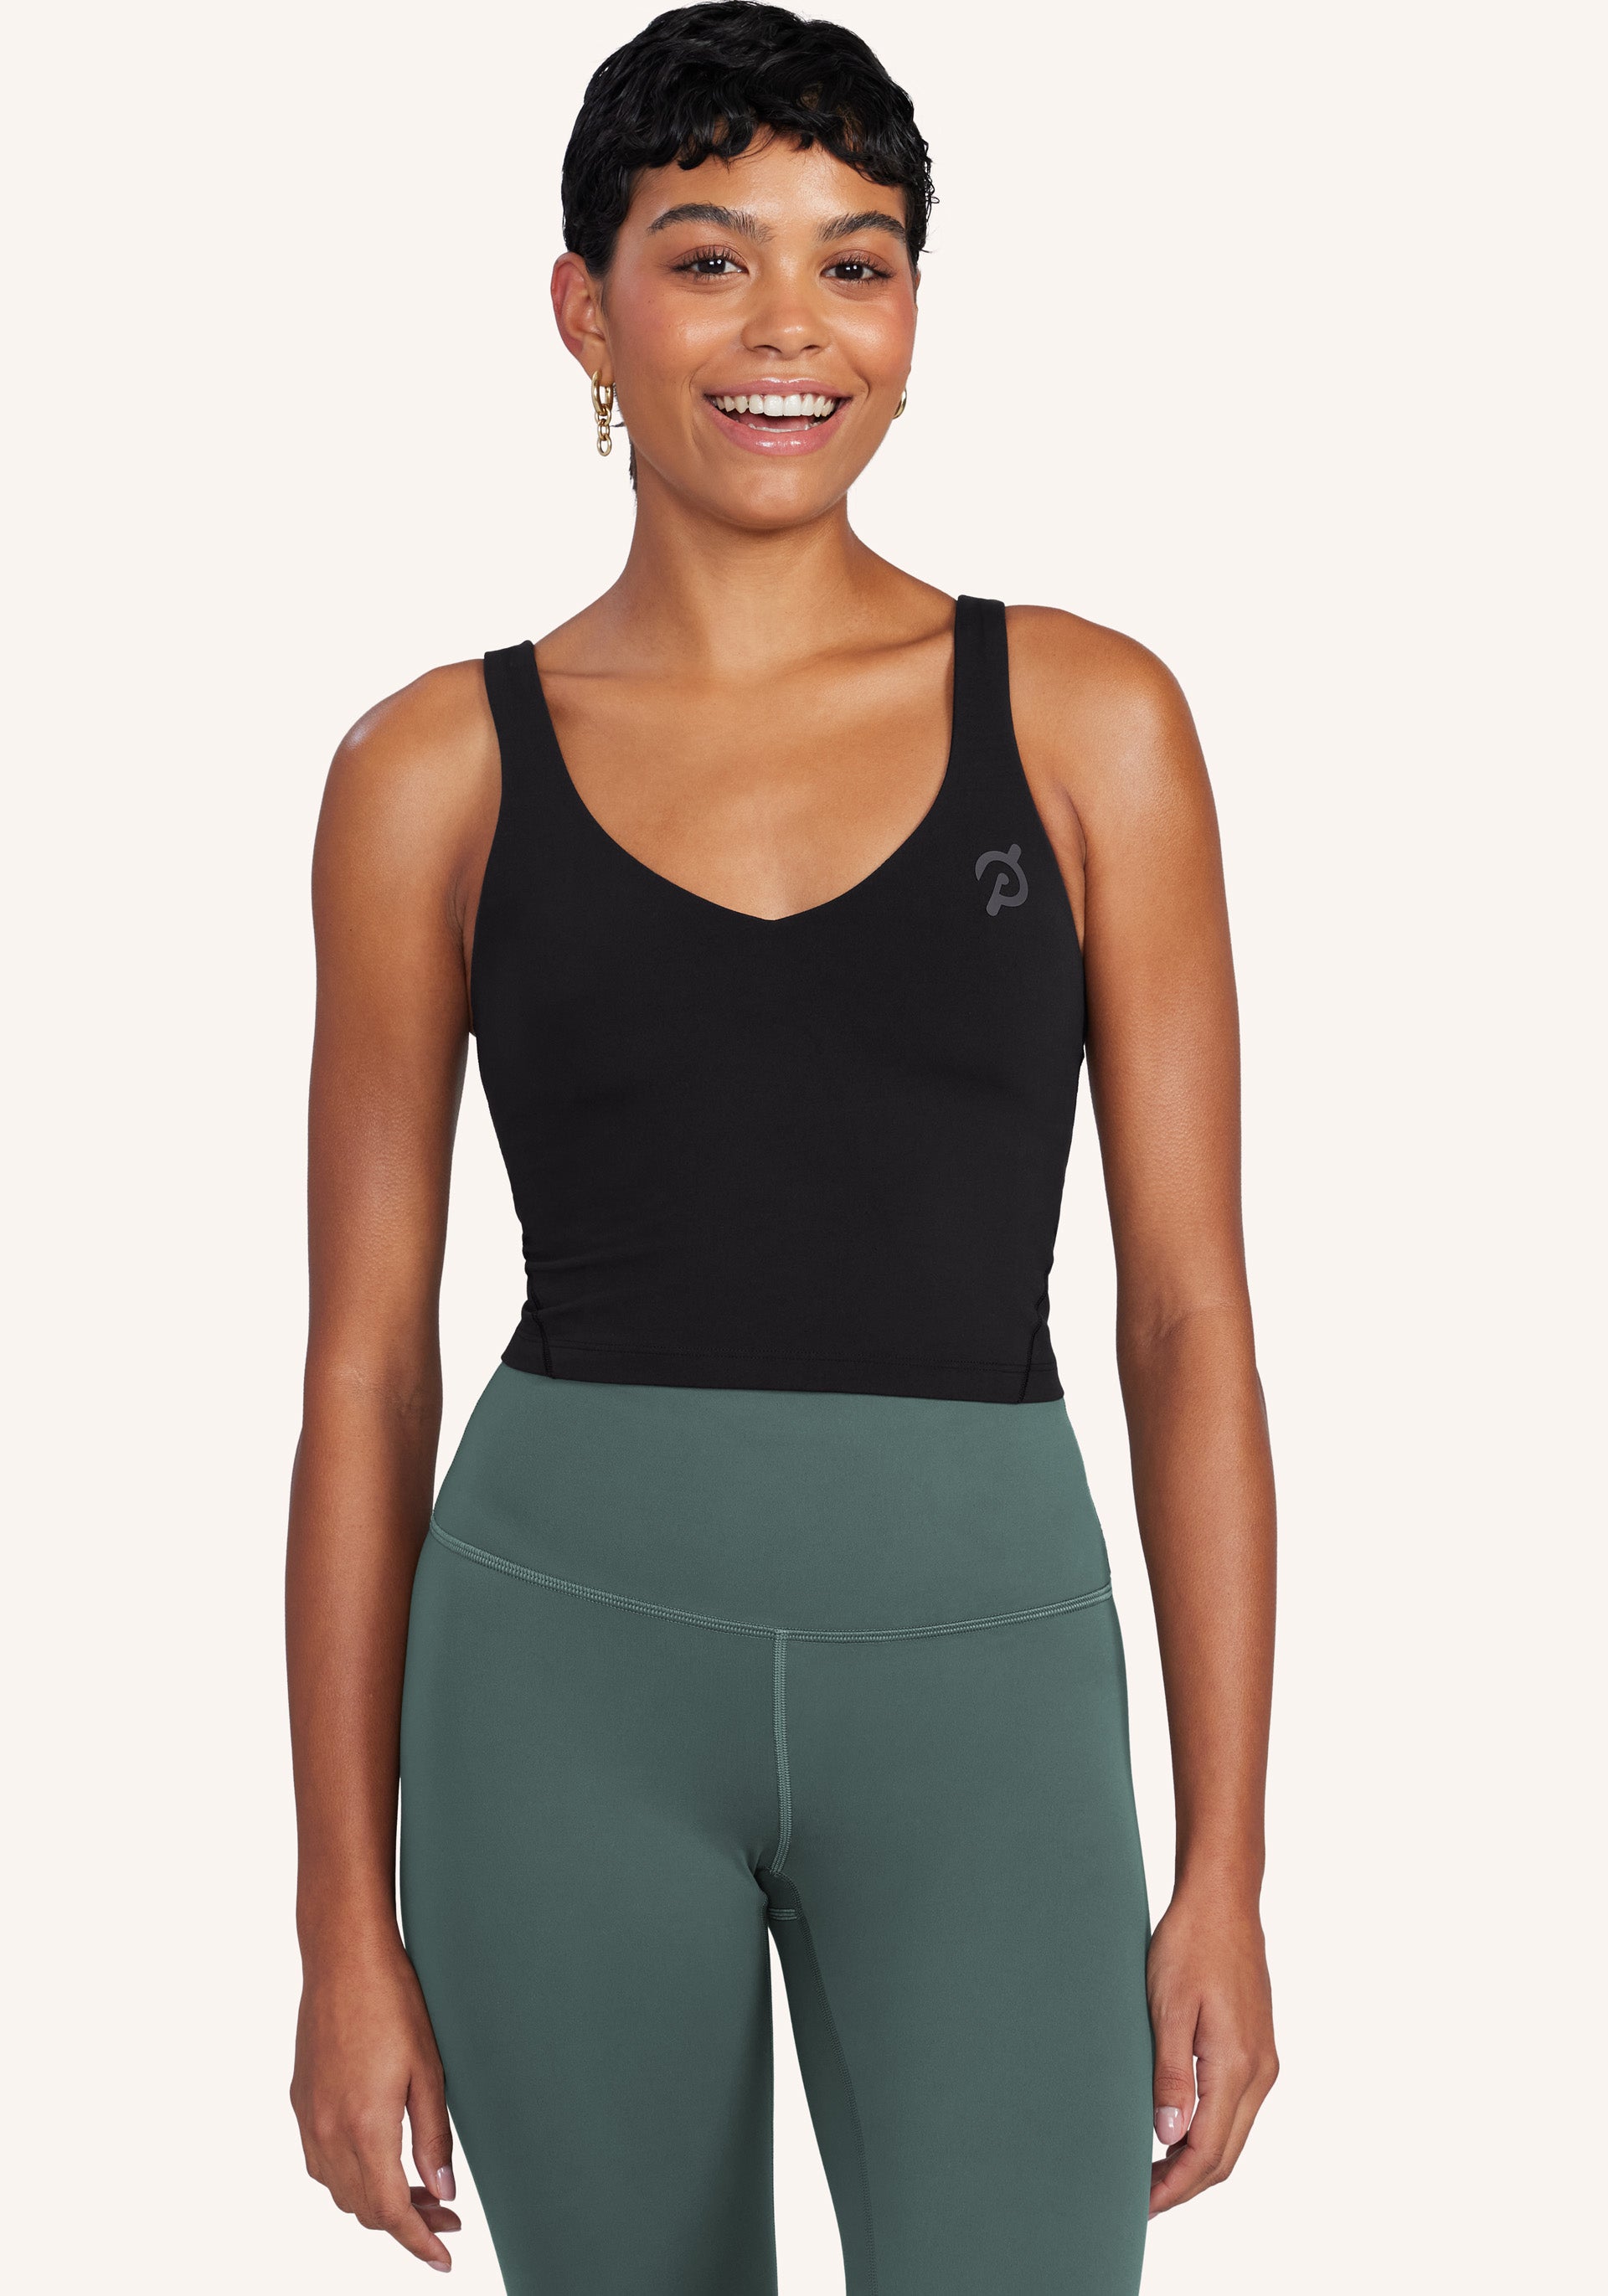 Lululemon align tank size 0, ⭐️looking to trade for a